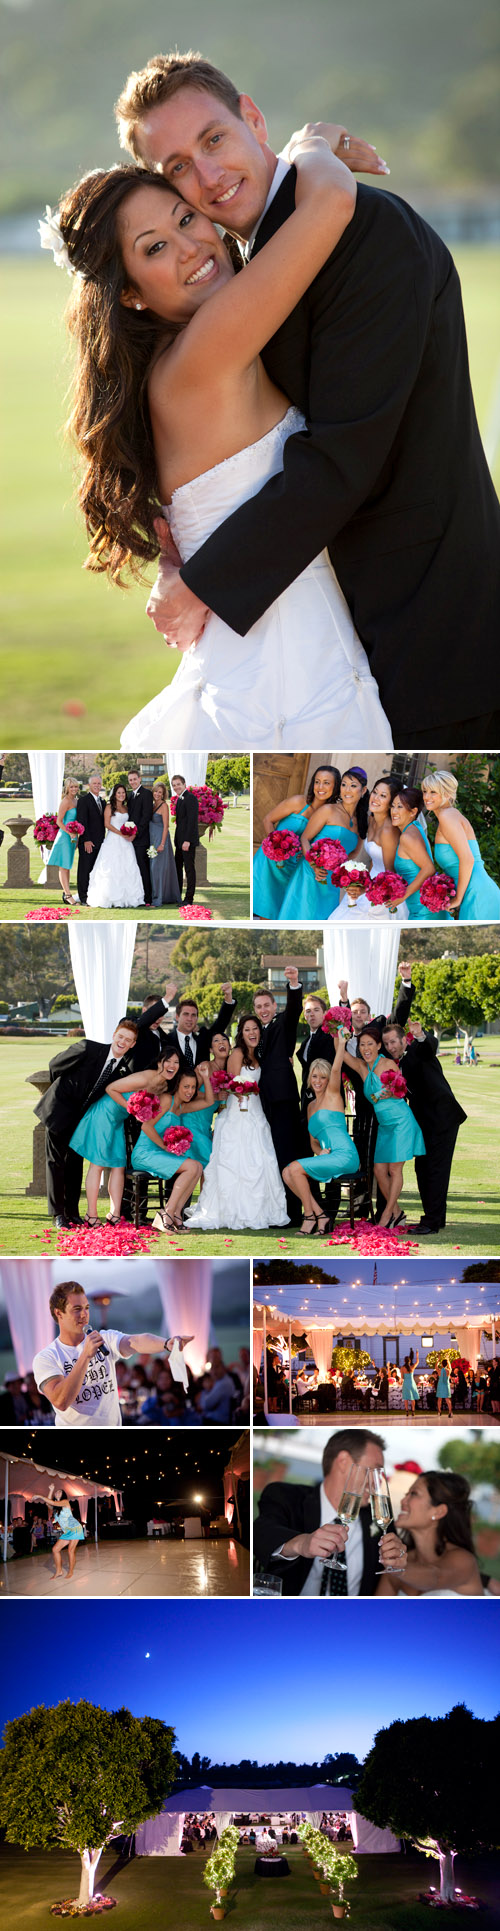 Santa Barbara, California summertime real wedding reception, black, white, fuschia pink and turquoise wedding color palette, images by Melissa Musgrove Photography and Halberg Photographers